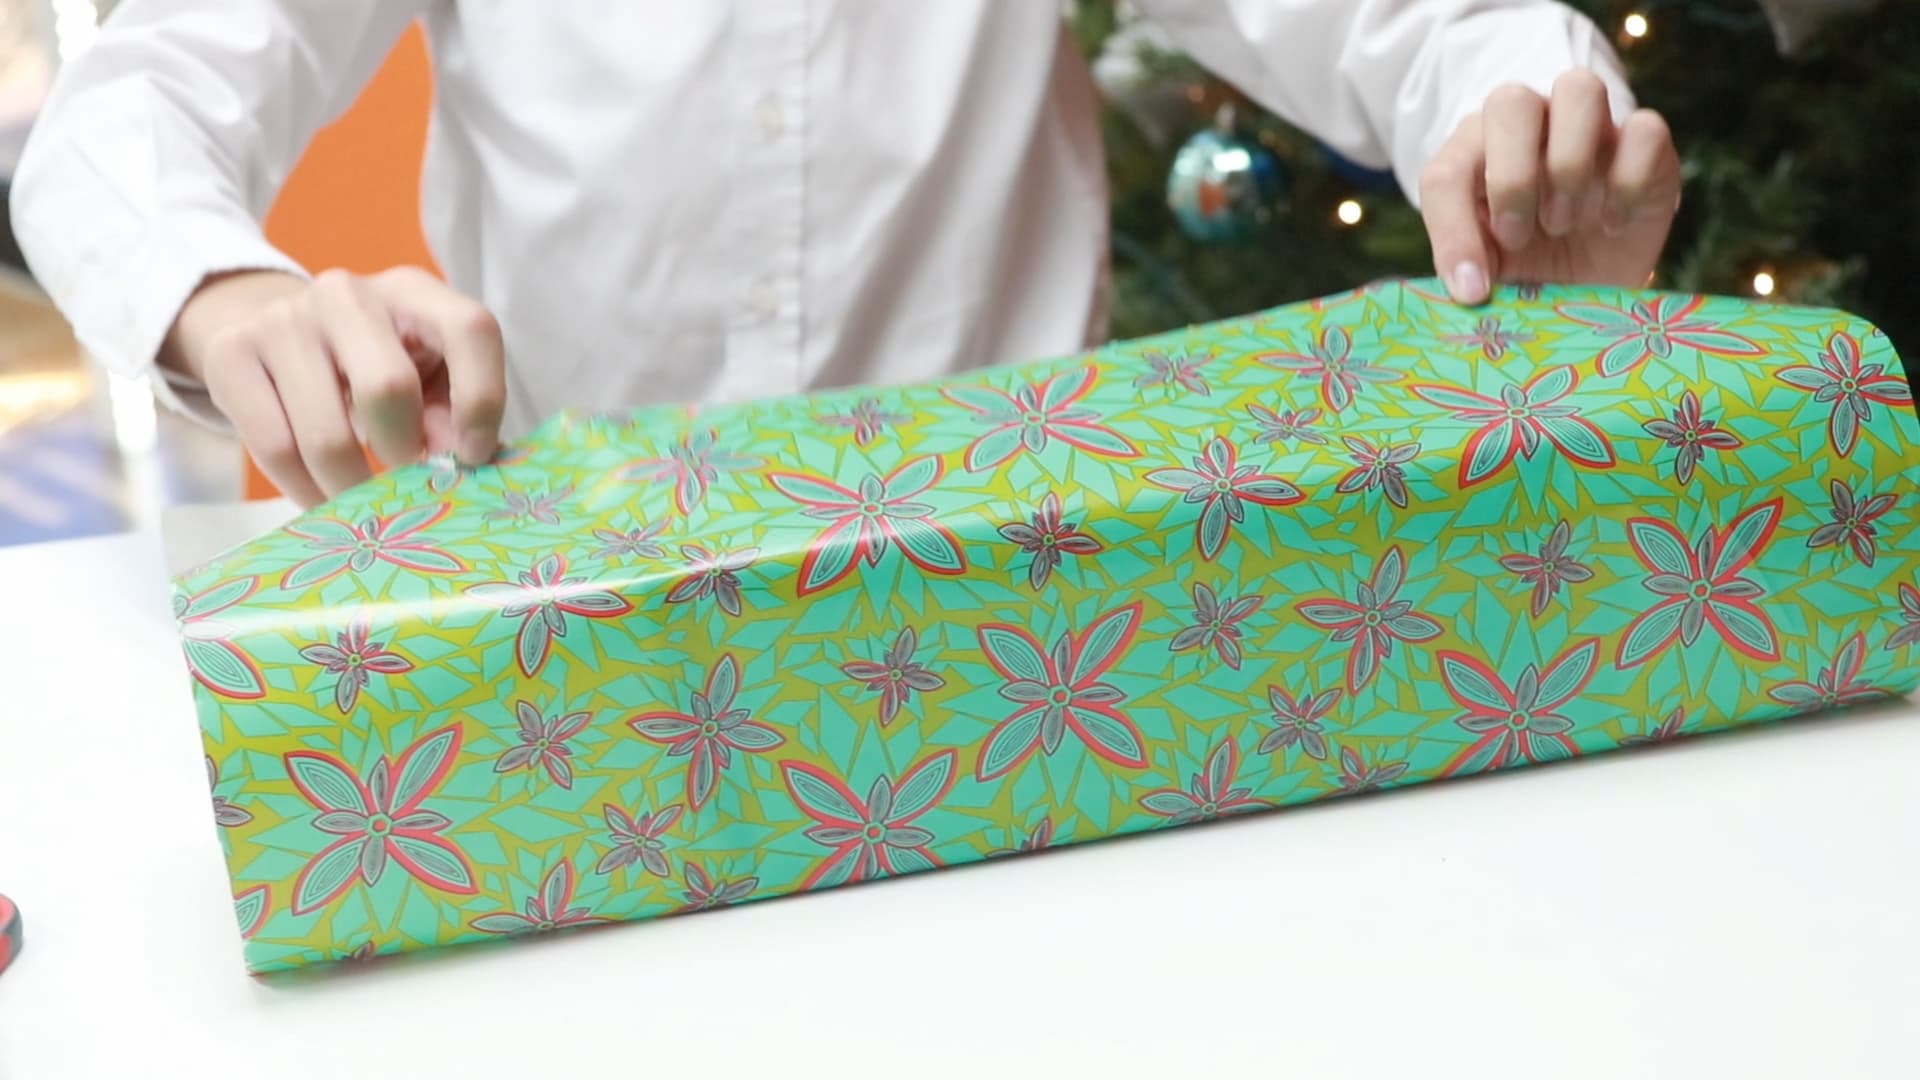 Taping wrapping paper to the box